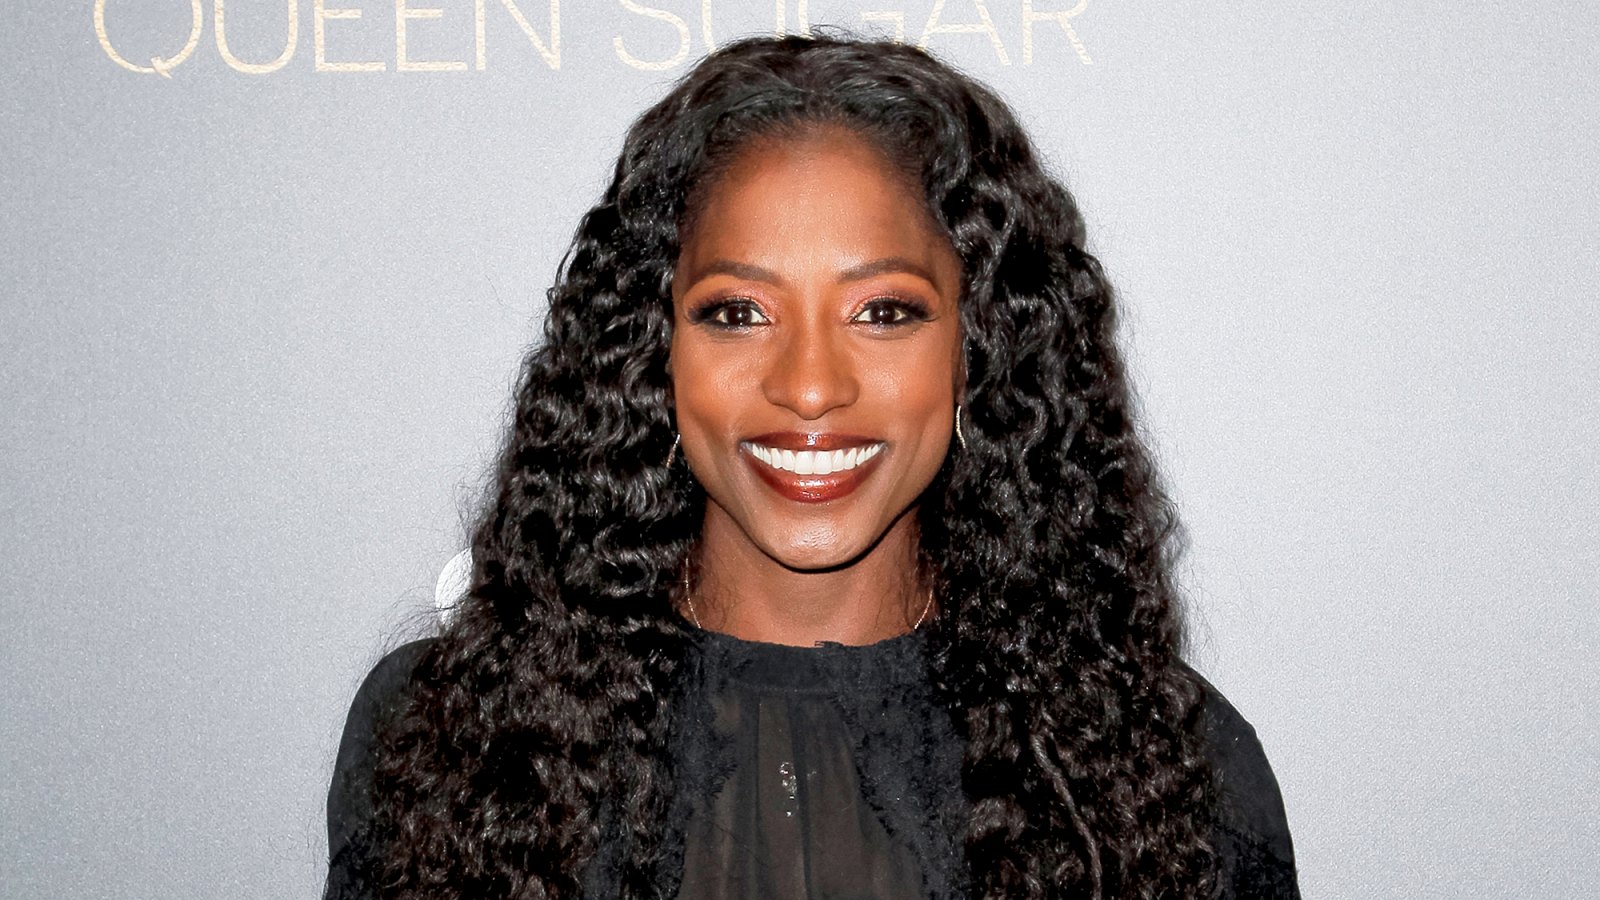 Rutina Wesley attends the taping of "Queen Sugar After-Show" at OWN Oprah Winfrey Network in West Hollywood, California.